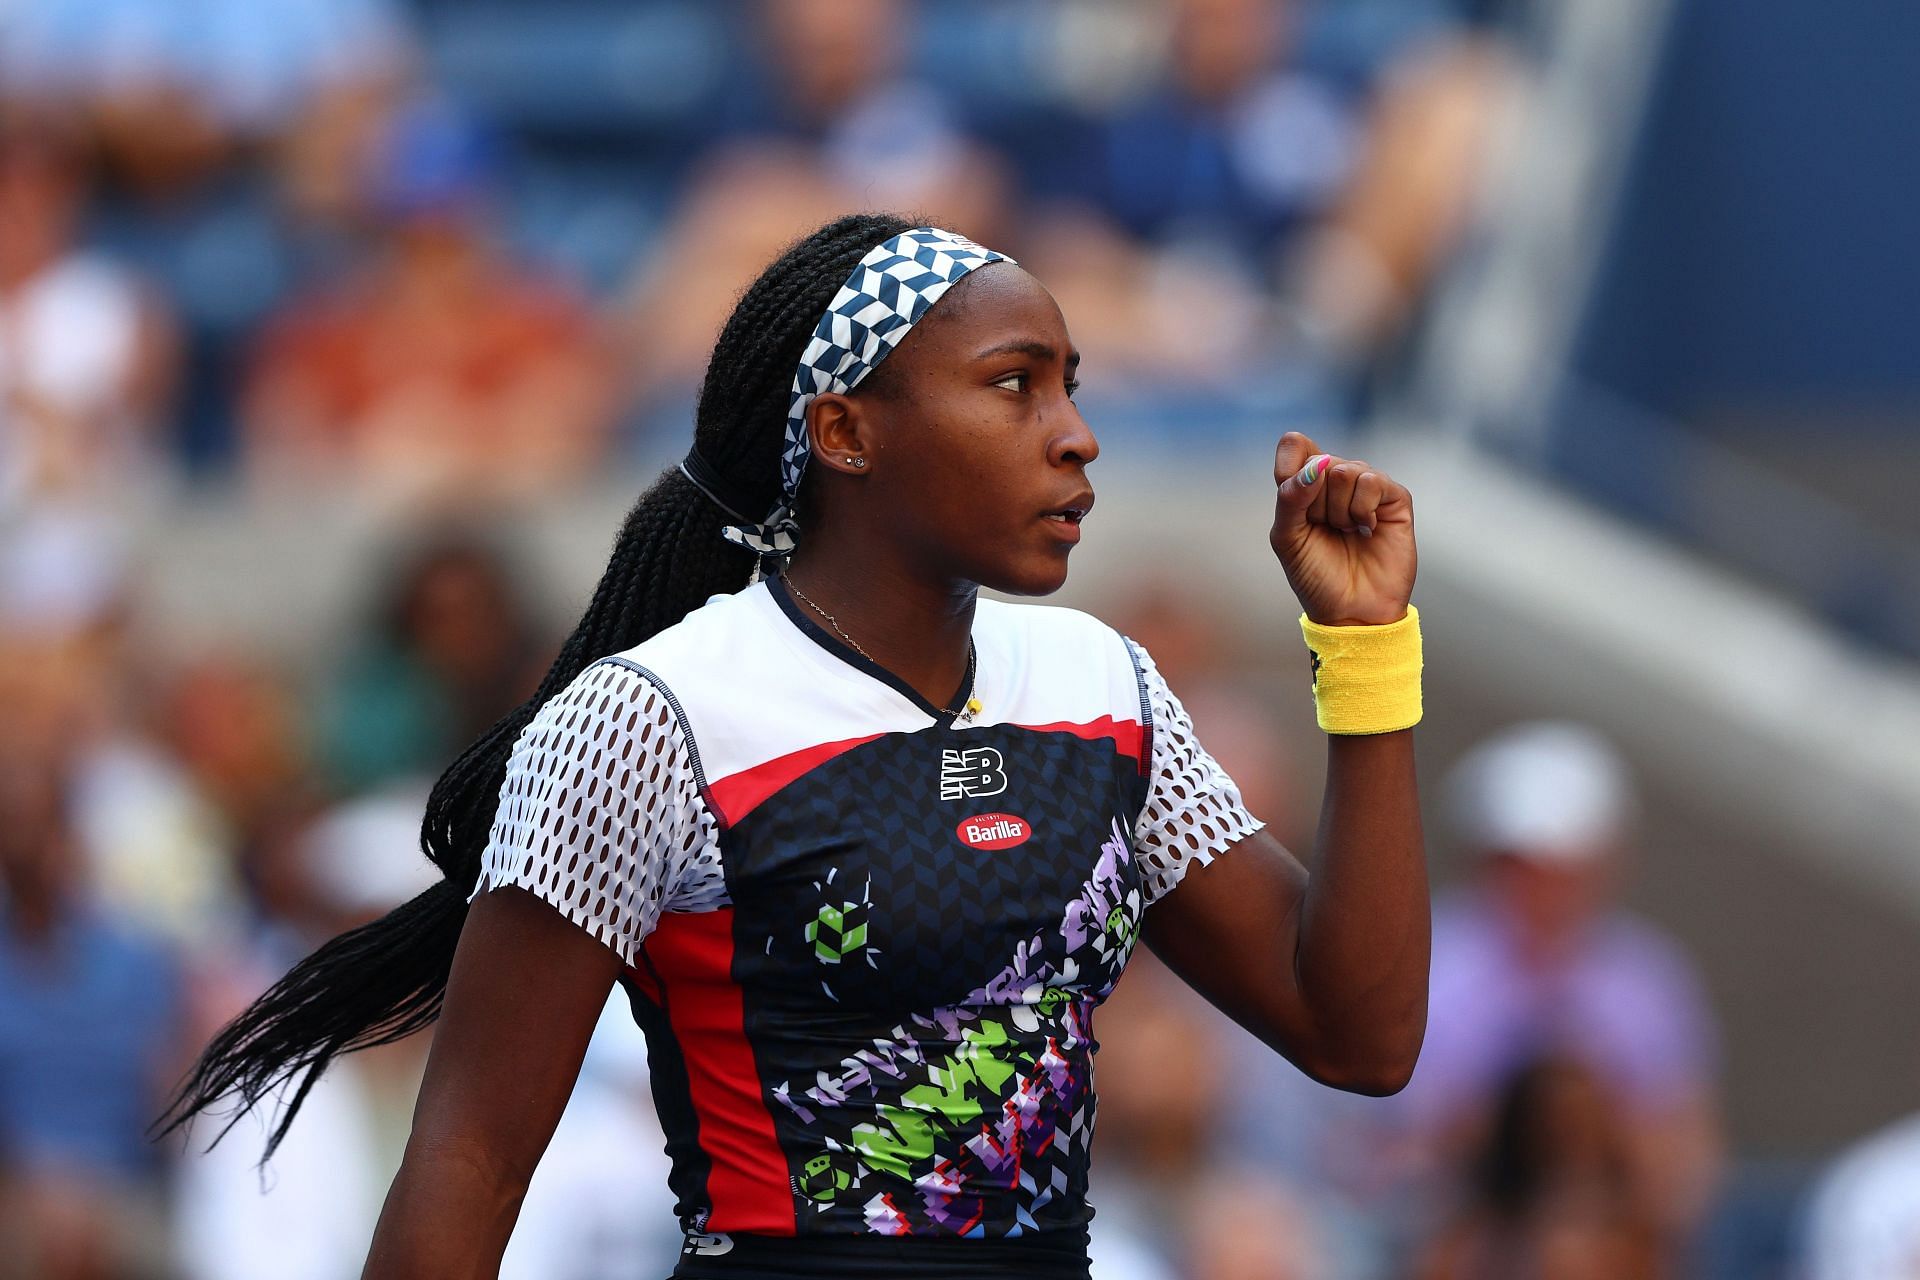 Coco Gauff says she only focuses on playing the ball during matches